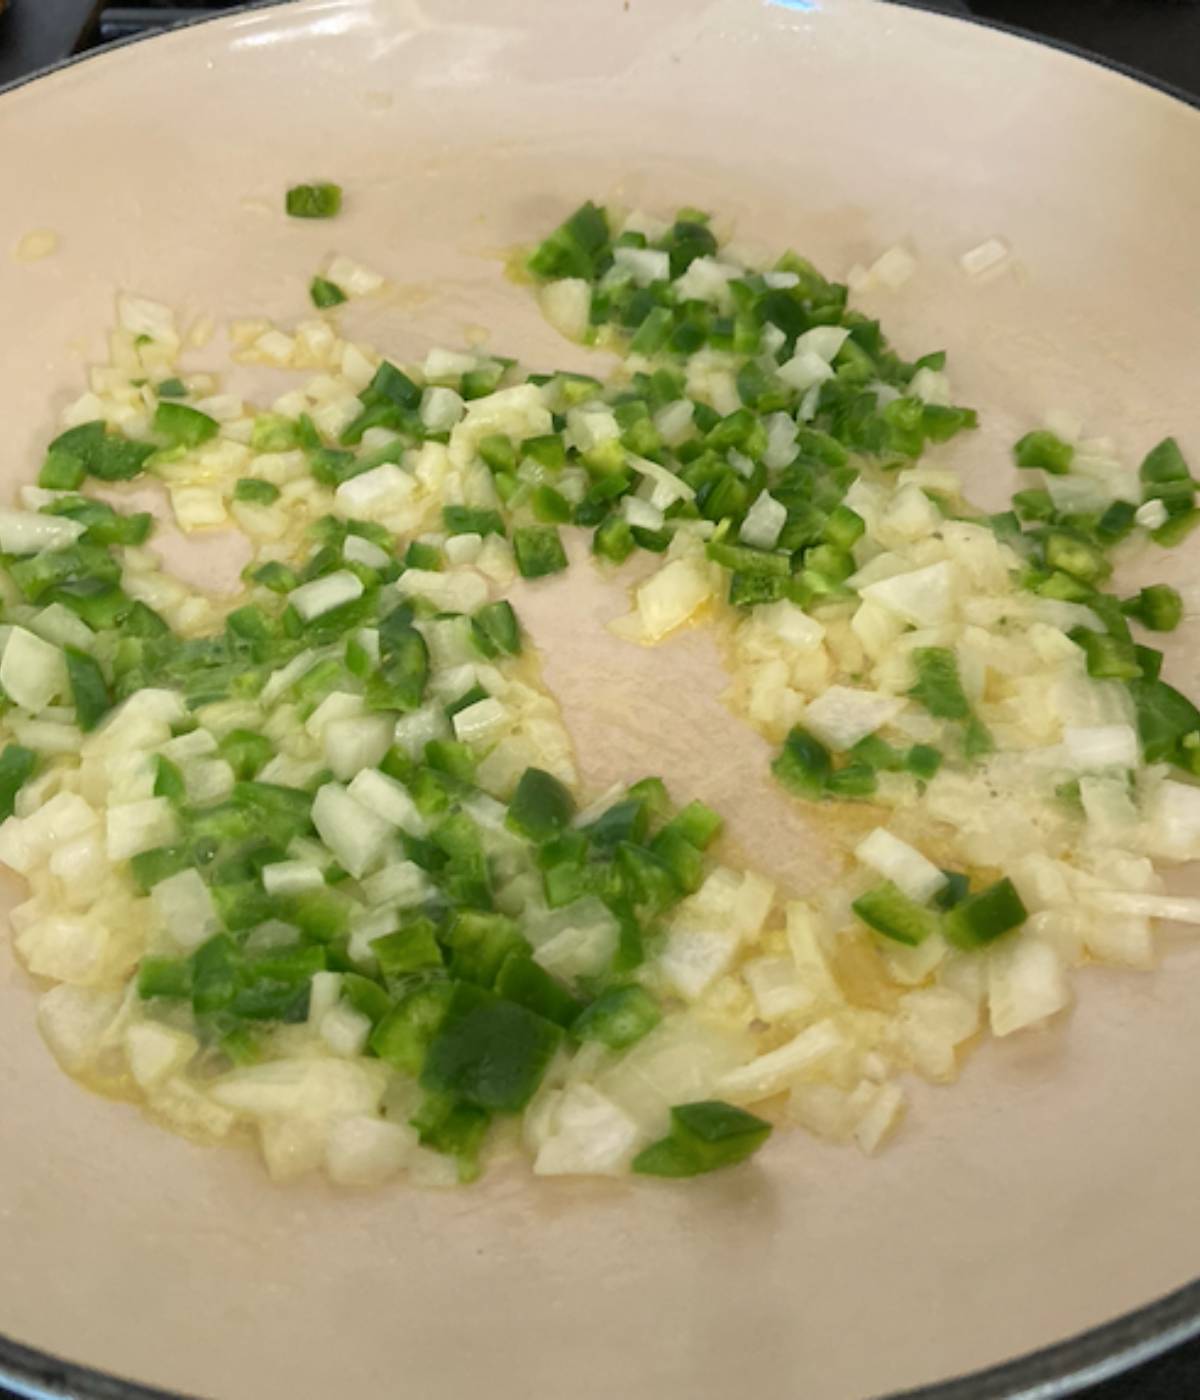 Jalapeno peppers and onions cooking in skillet.